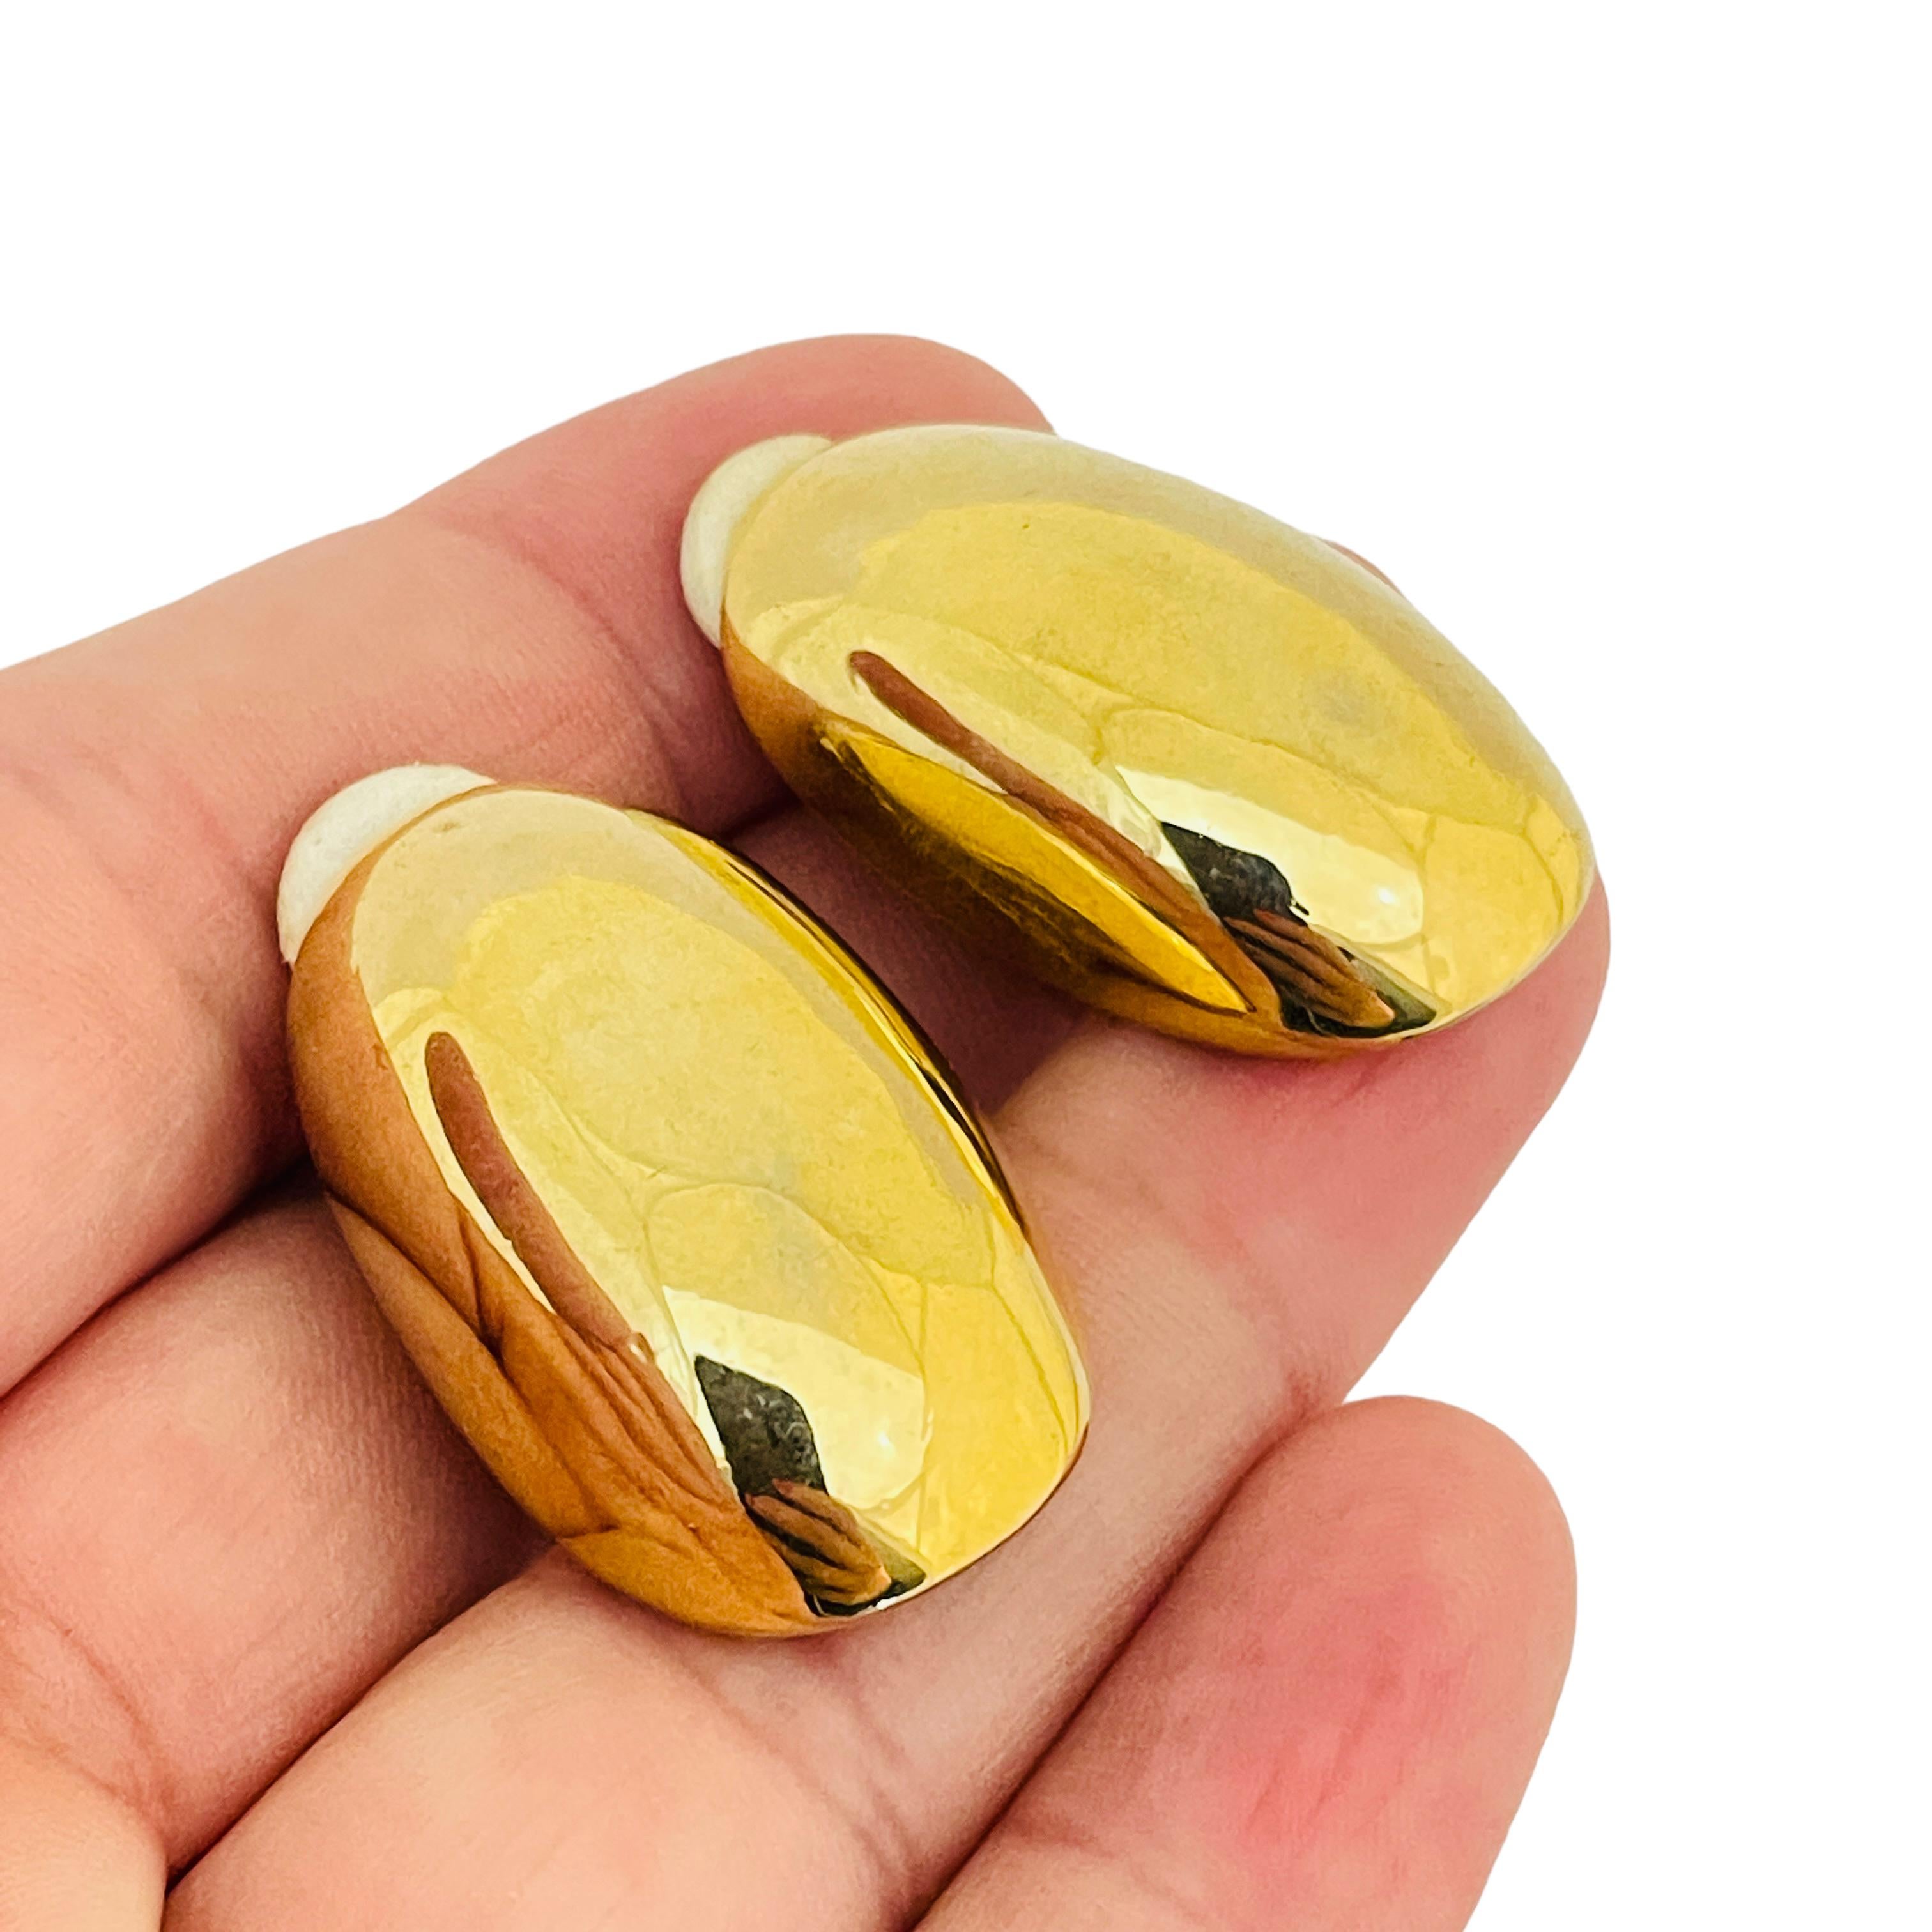 Vintage NORMA JEAN shiny gold modernist designer runway clip on earrings In Good Condition For Sale In Palos Hills, IL